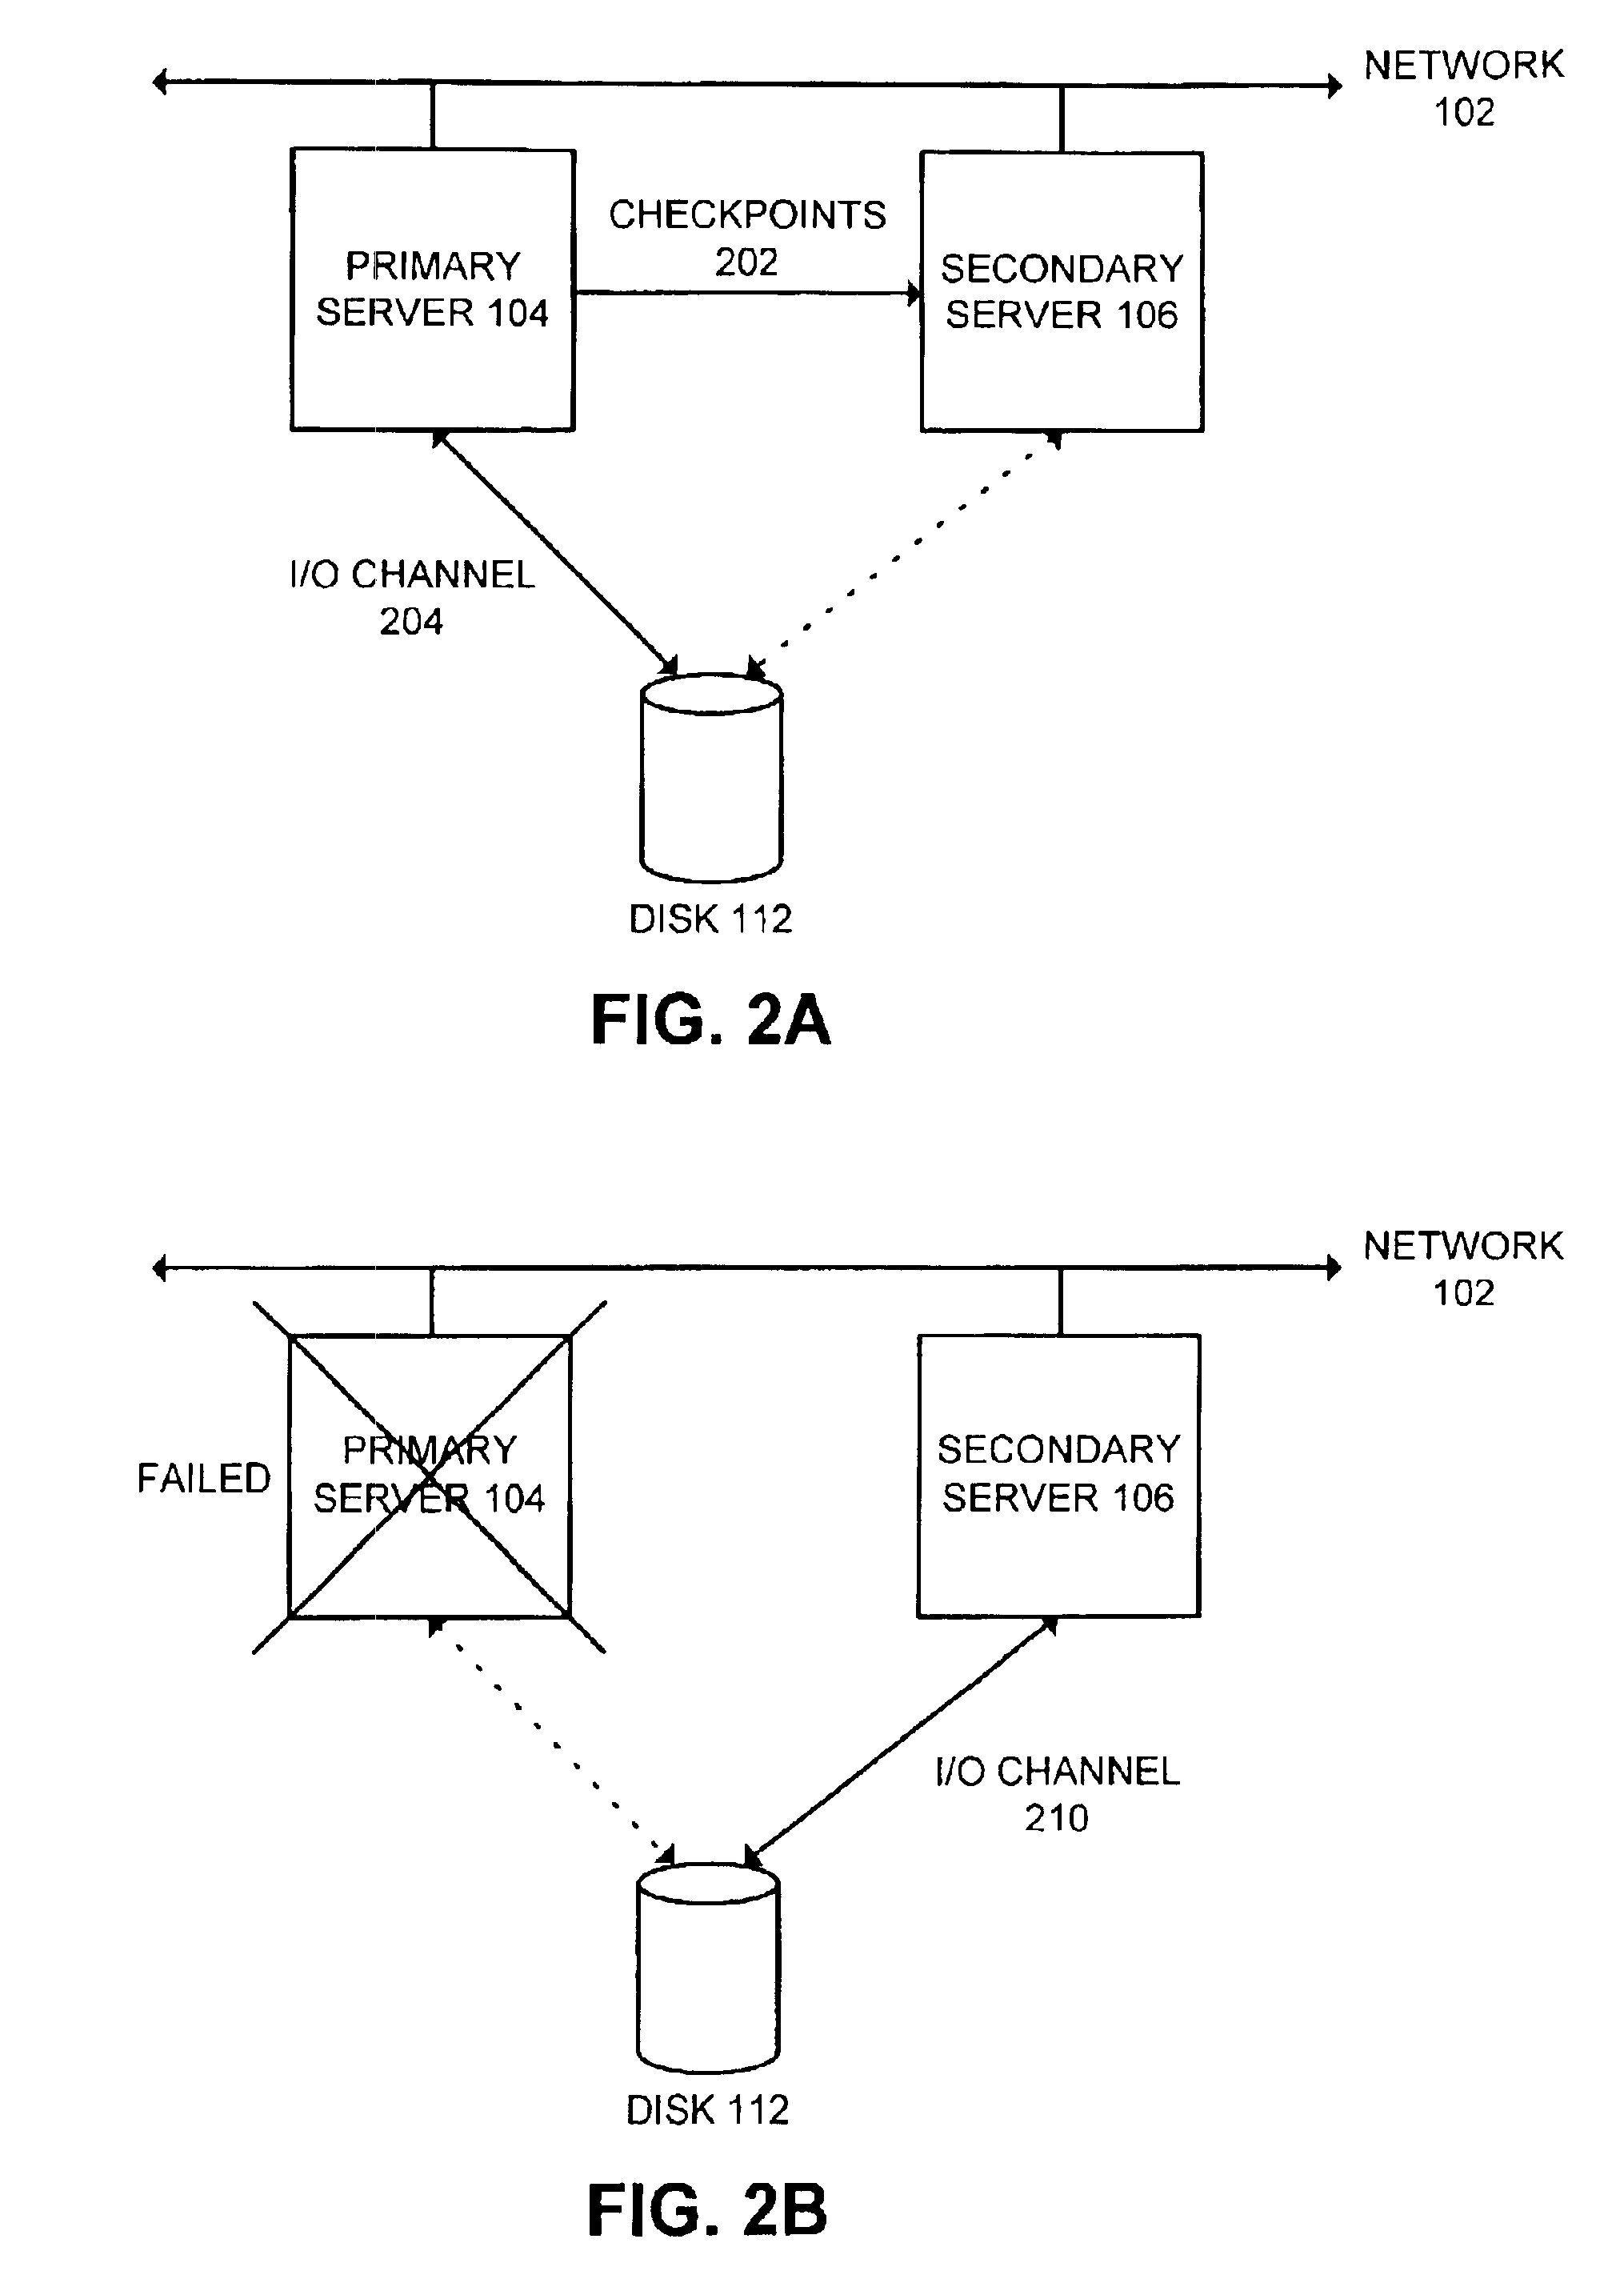 Facilitating failover to a secondary file server in a highly available file system